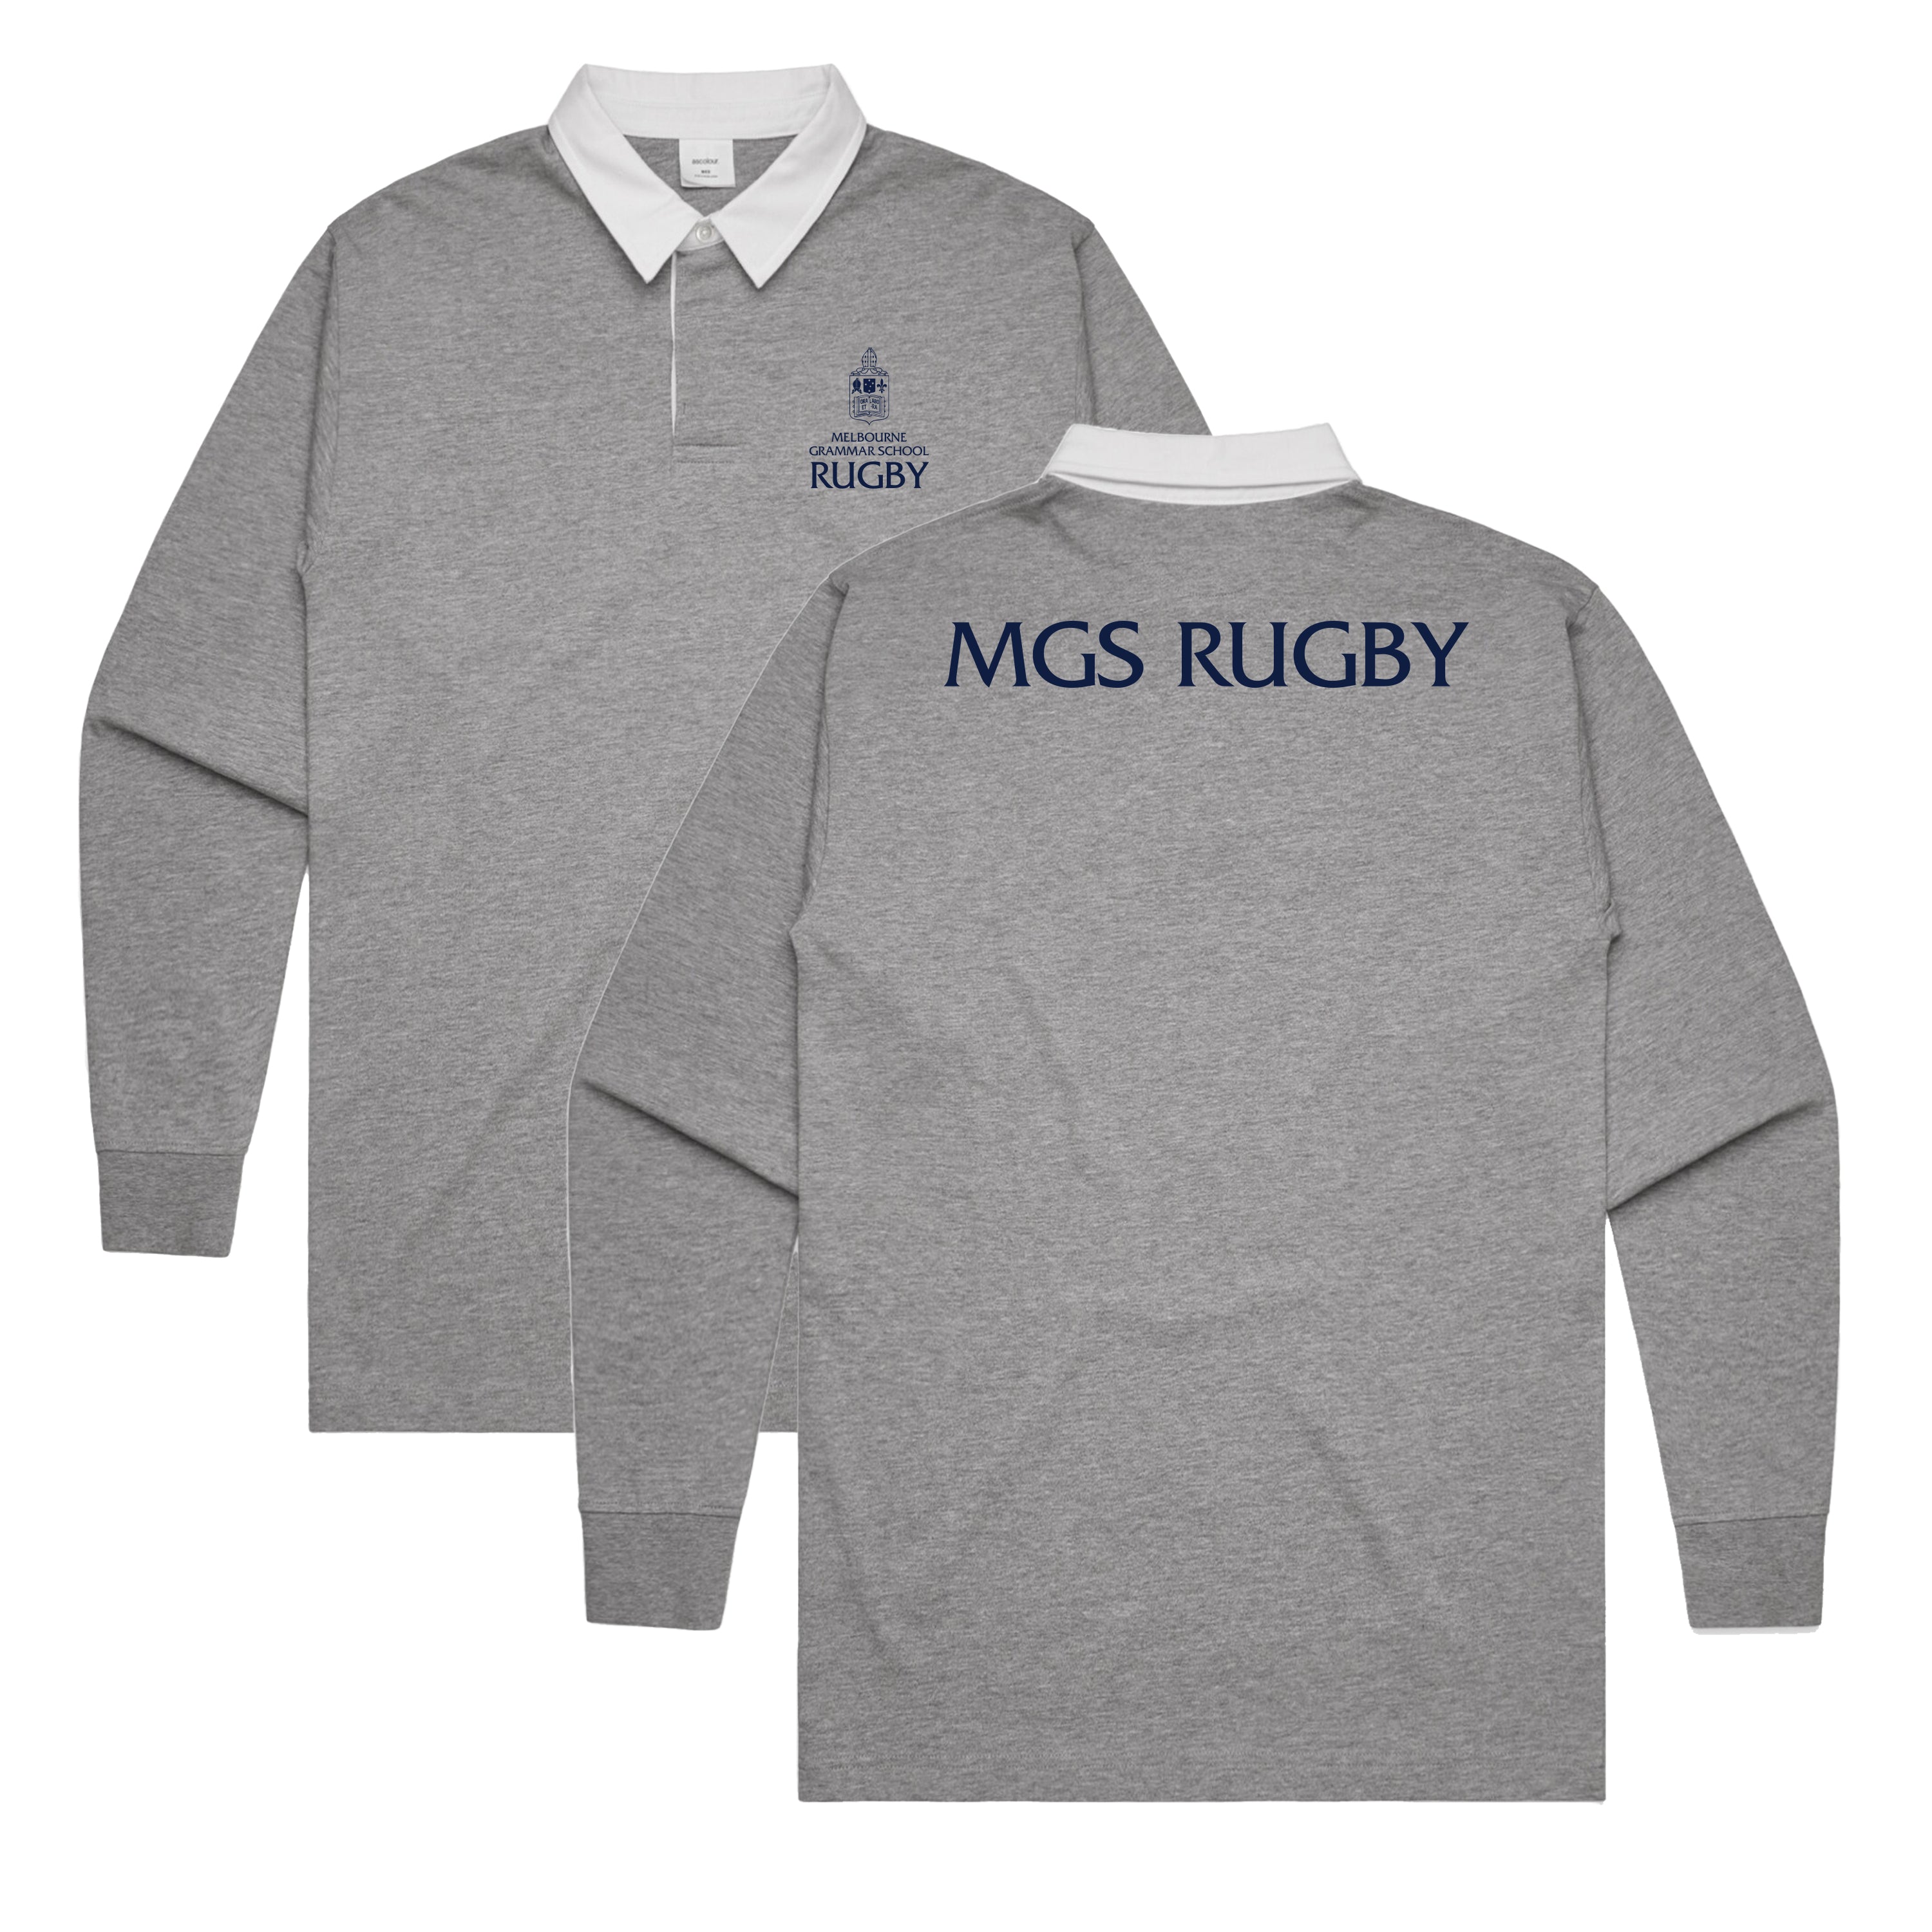 MGS MENS RUGBY JERSEY - 5410